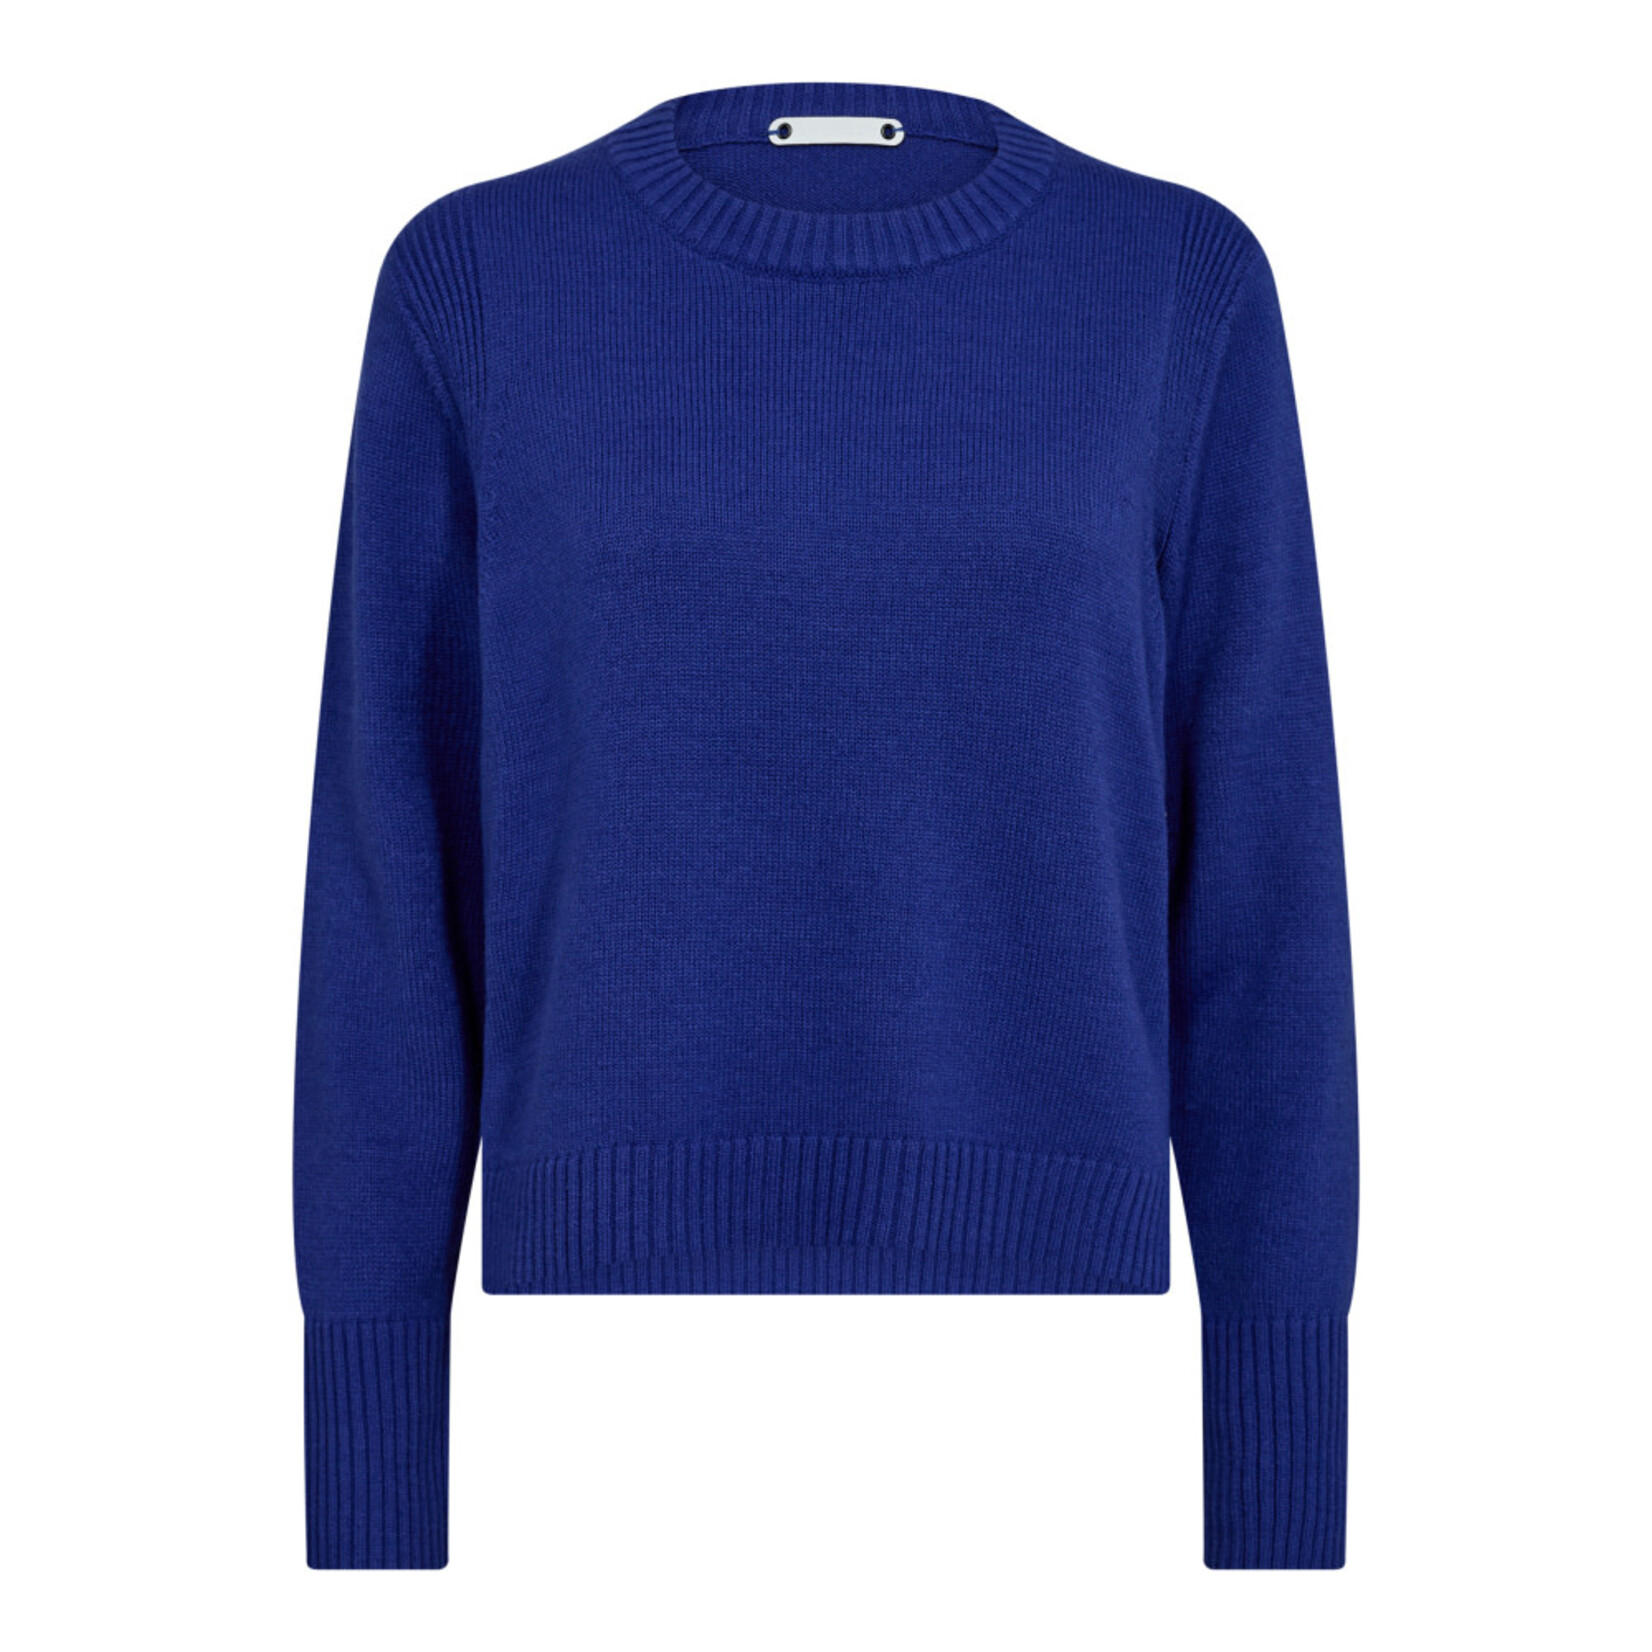 Co'couture Mero o-knit New blue